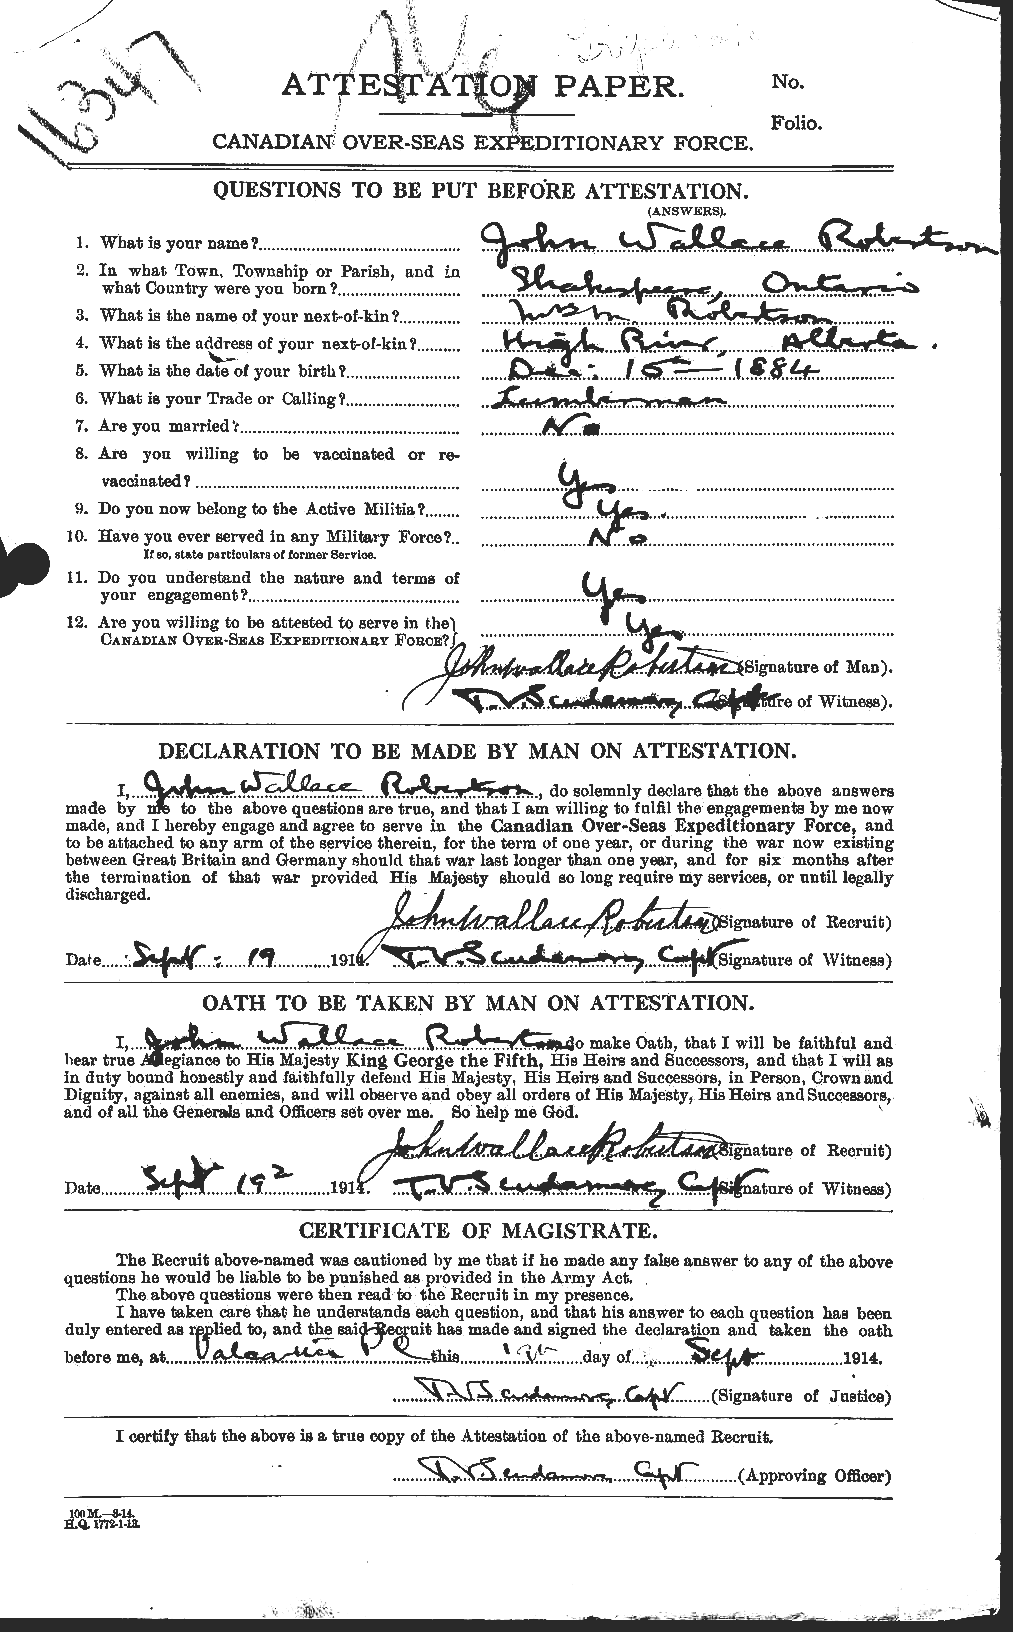 Personnel Records of the First World War - CEF 610303a